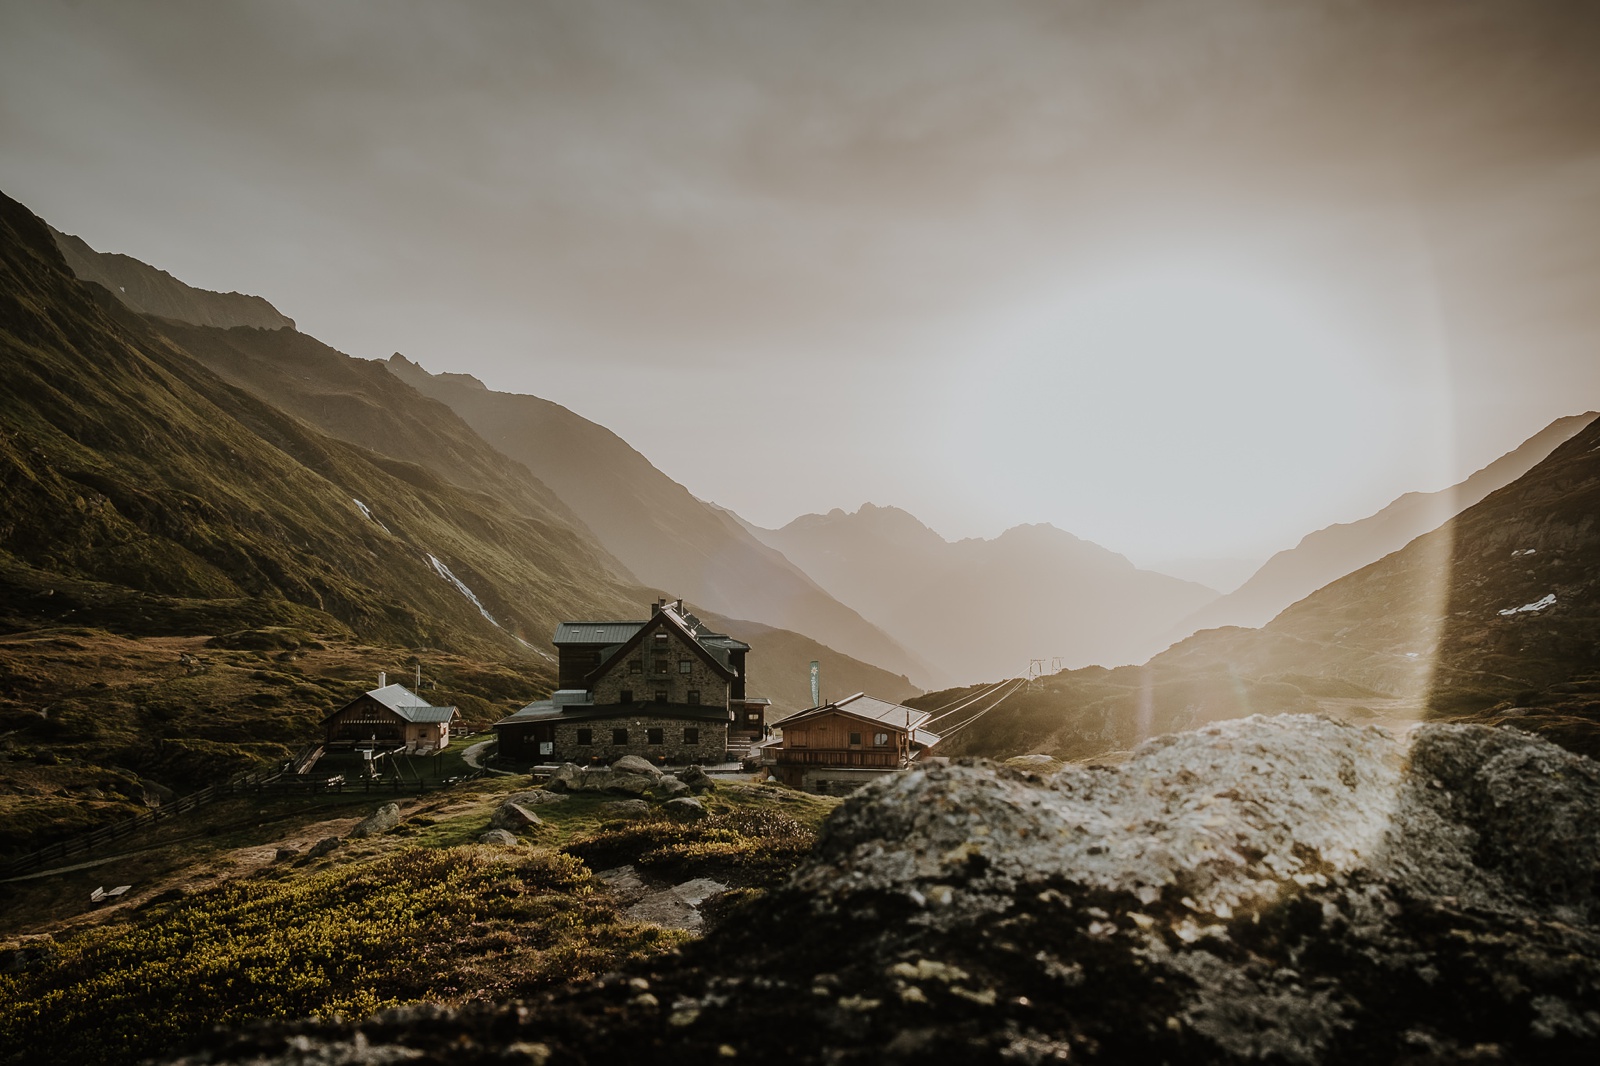 A mountain hut in the Austrian Alps at sunrise with green meadows and rocks in the foreground and high mountains in the distance.